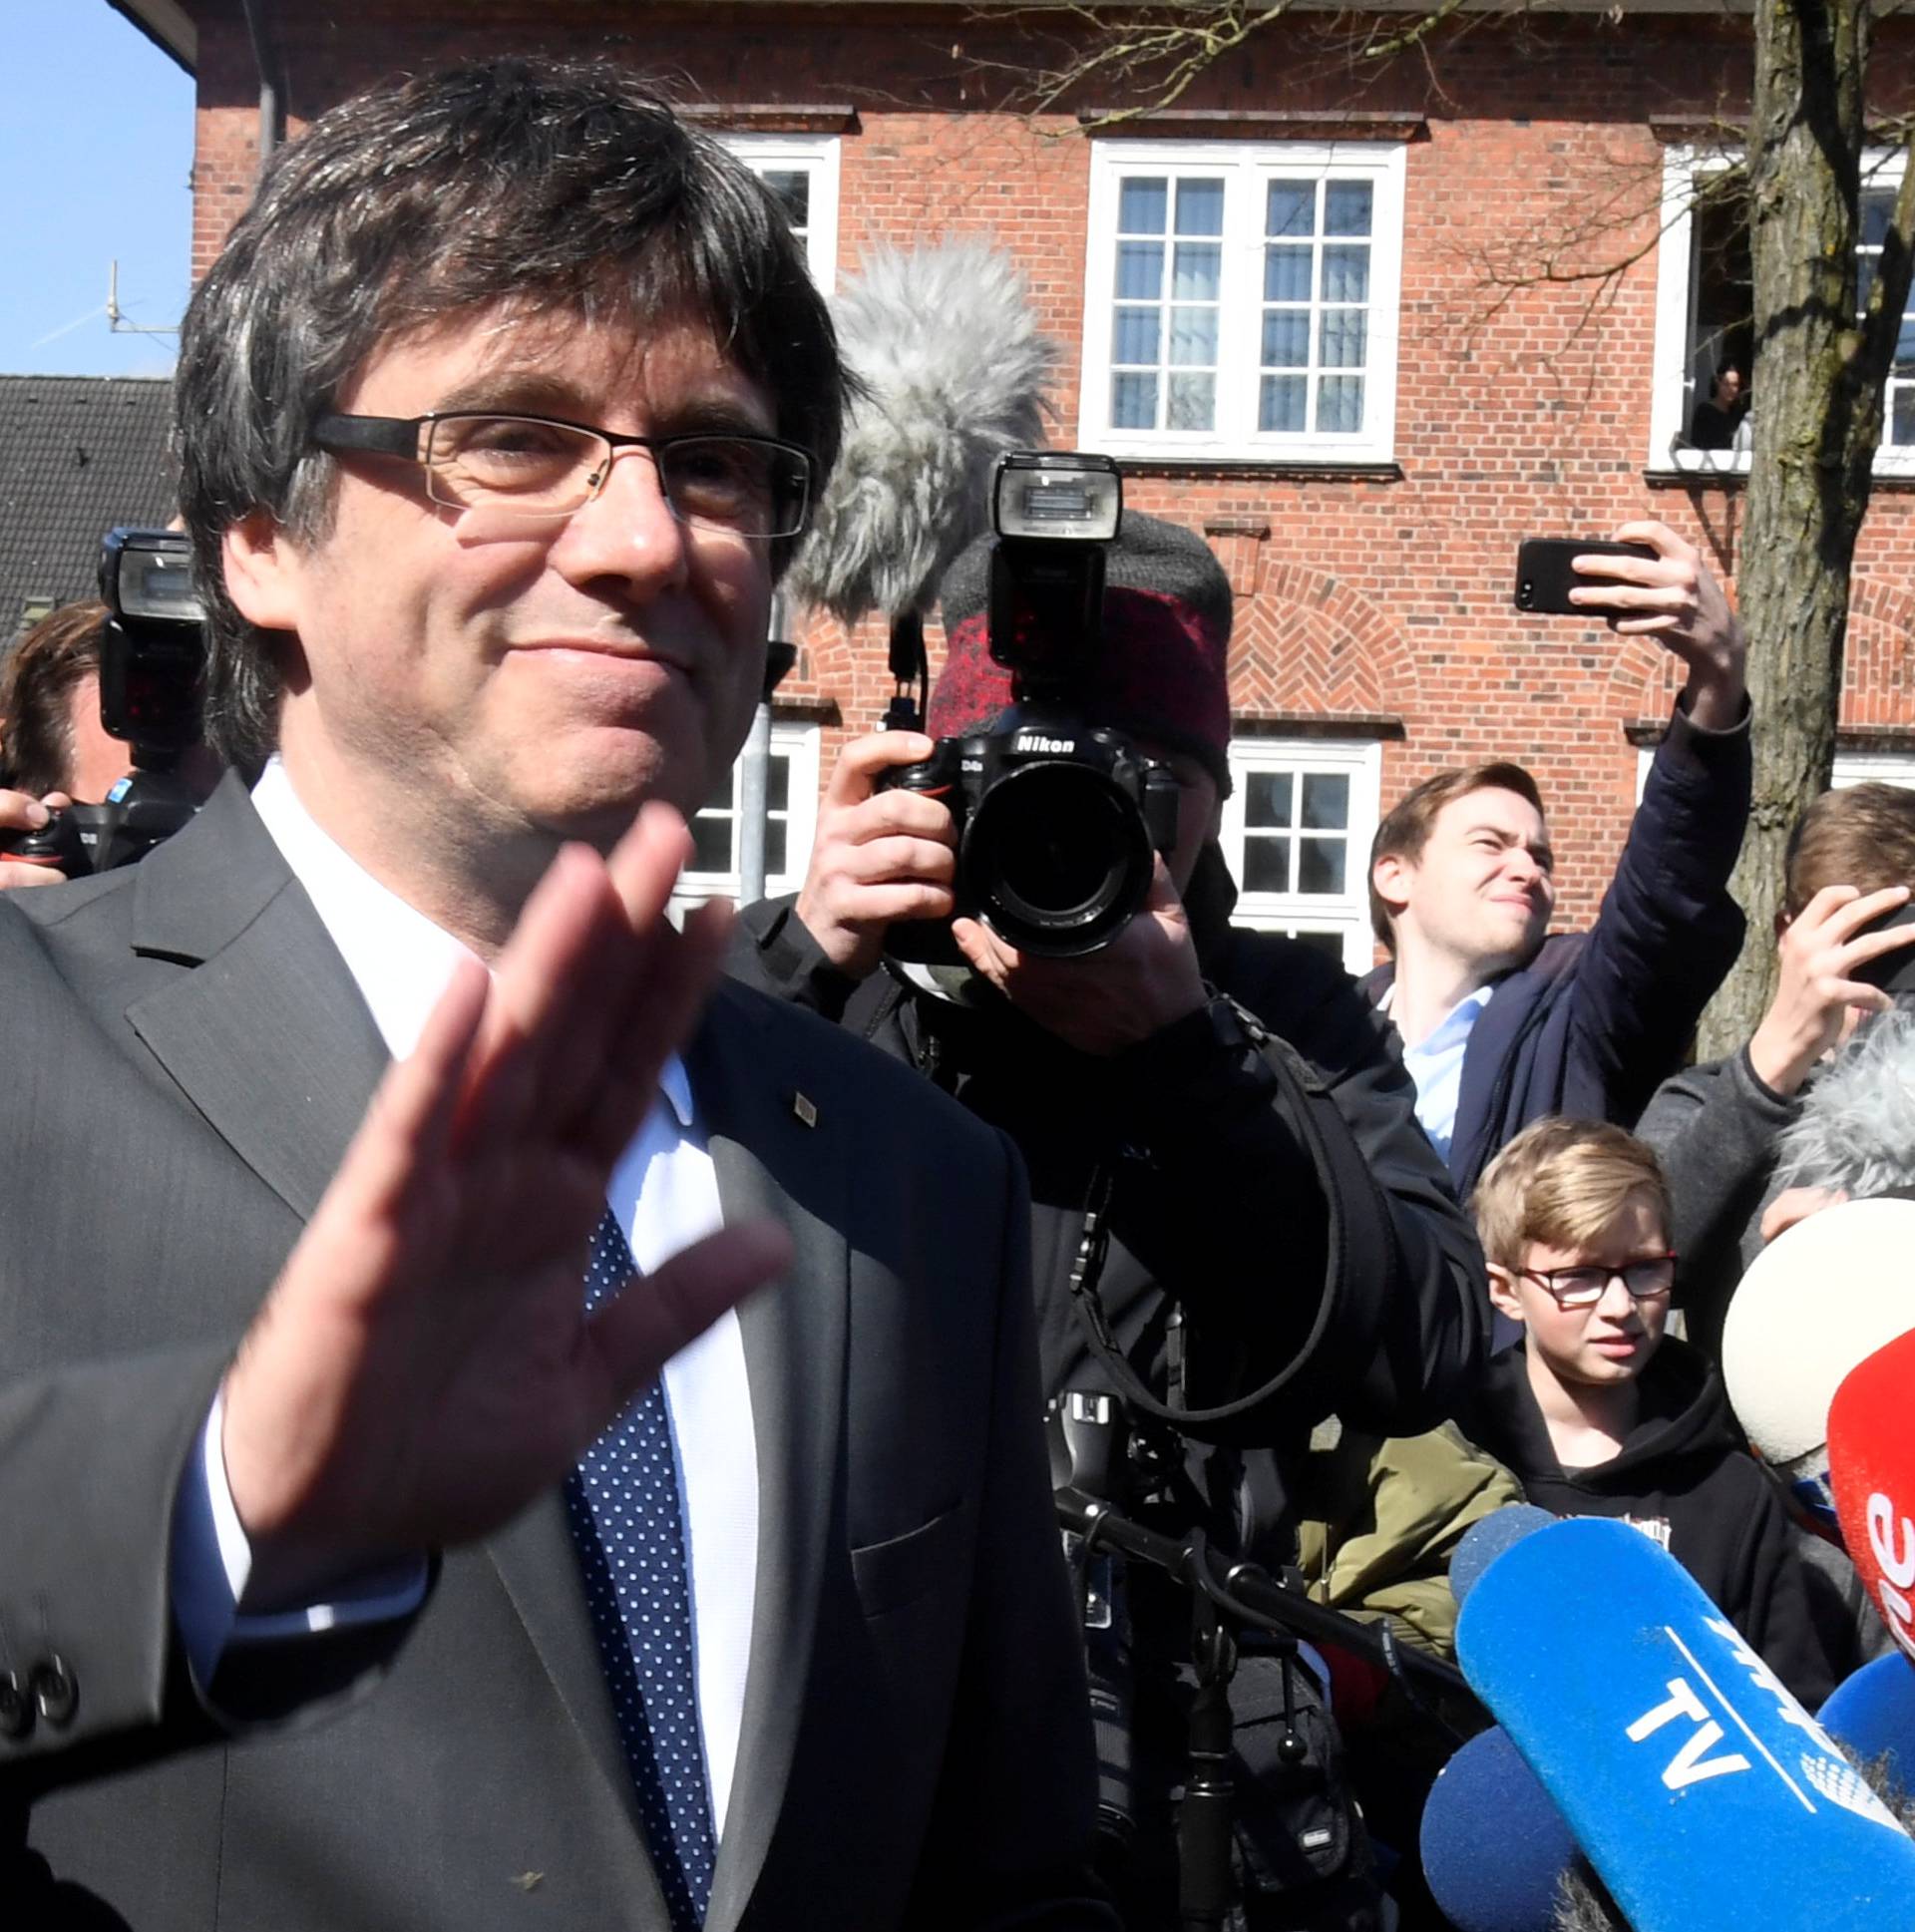 Catalonia's former leader Carles Puigdemont waves to the media as he leaves the prison in Neumuenster